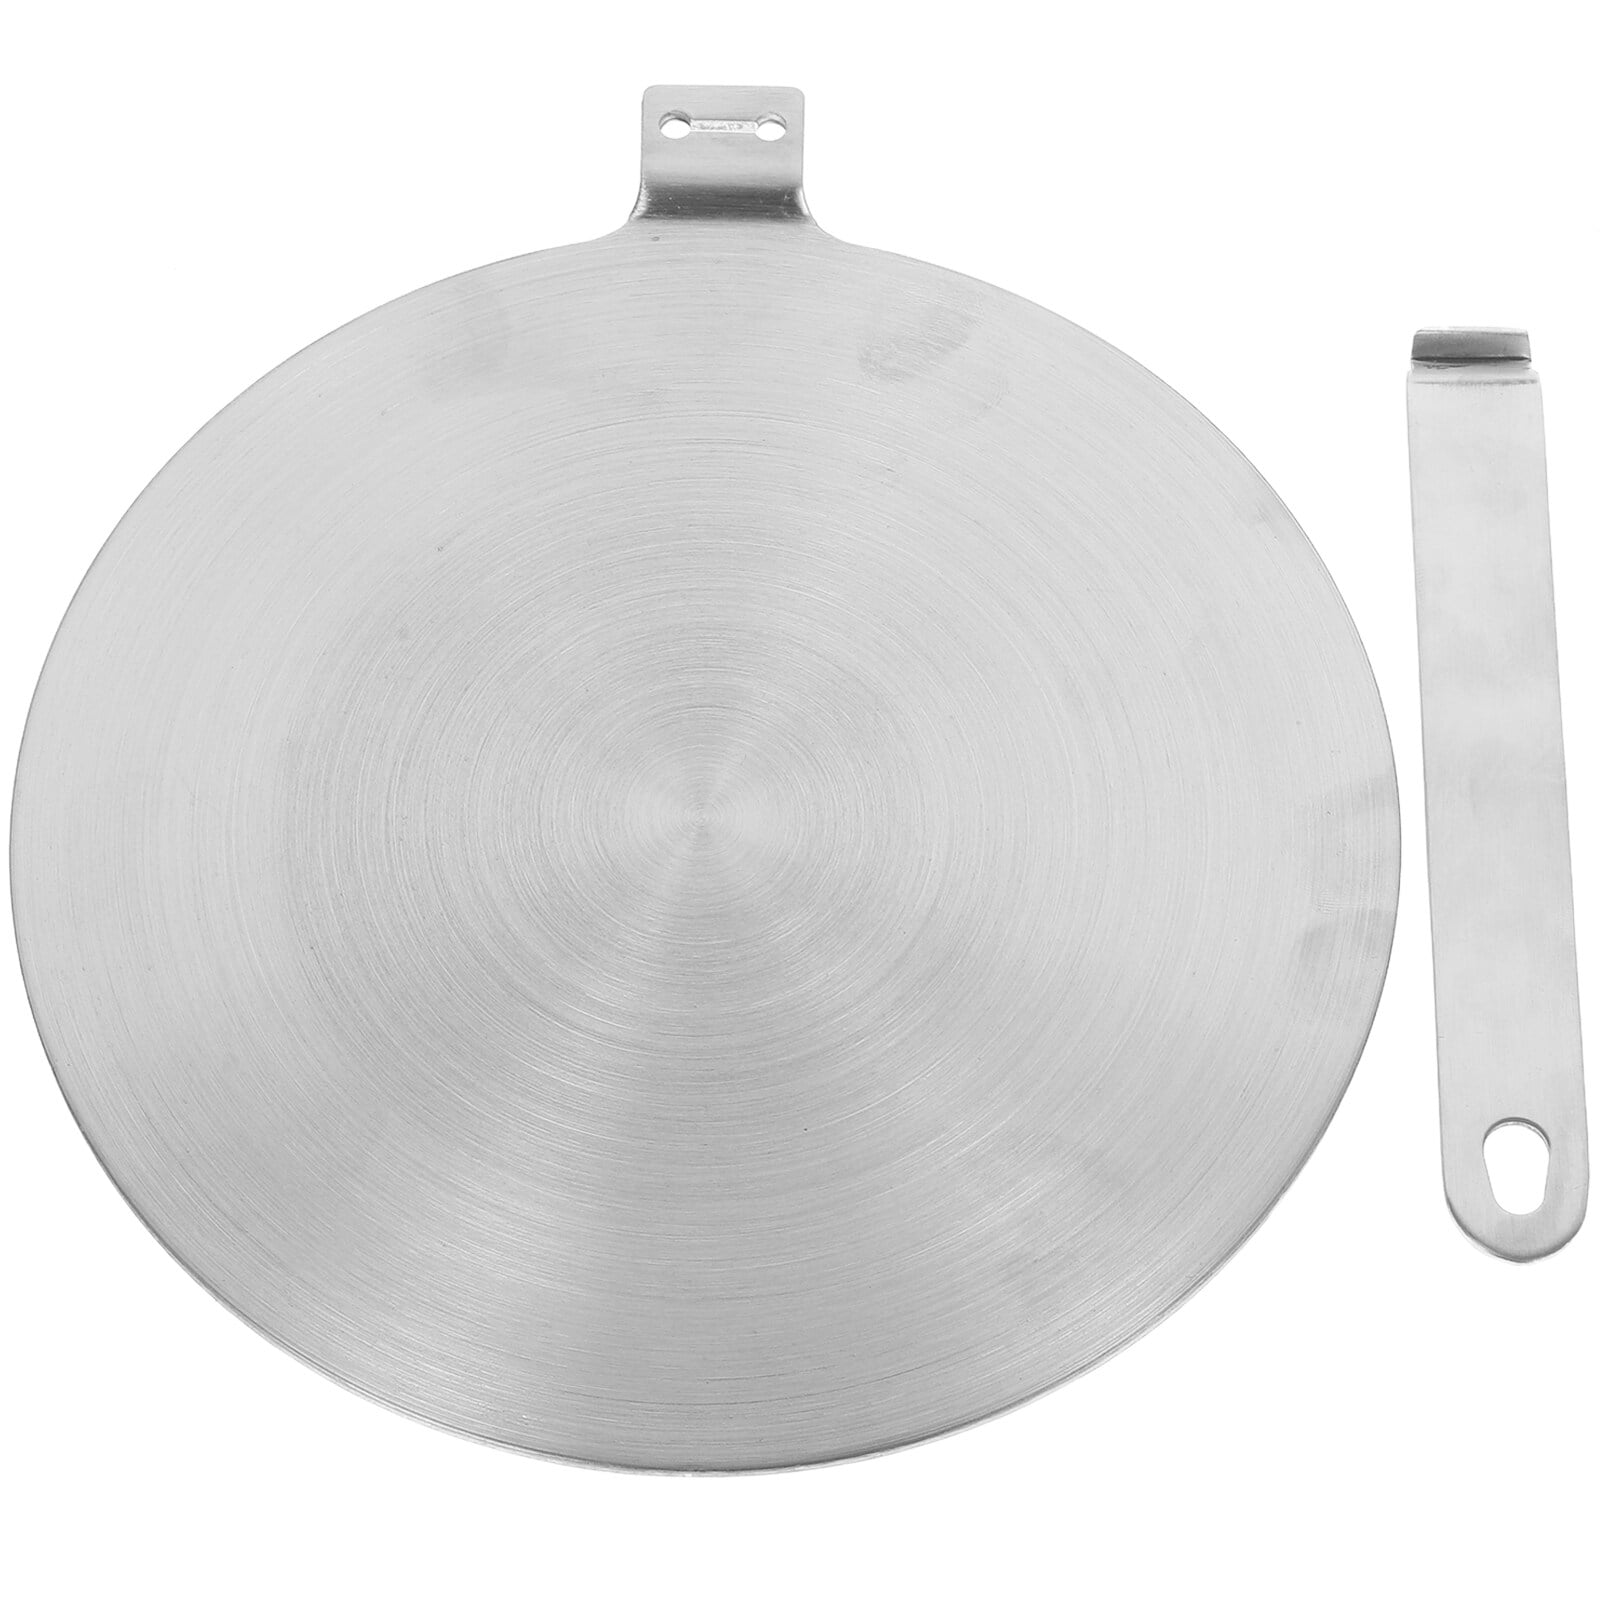 Universal adapter plate for induction hobs, Ø 28 cm - PEARL